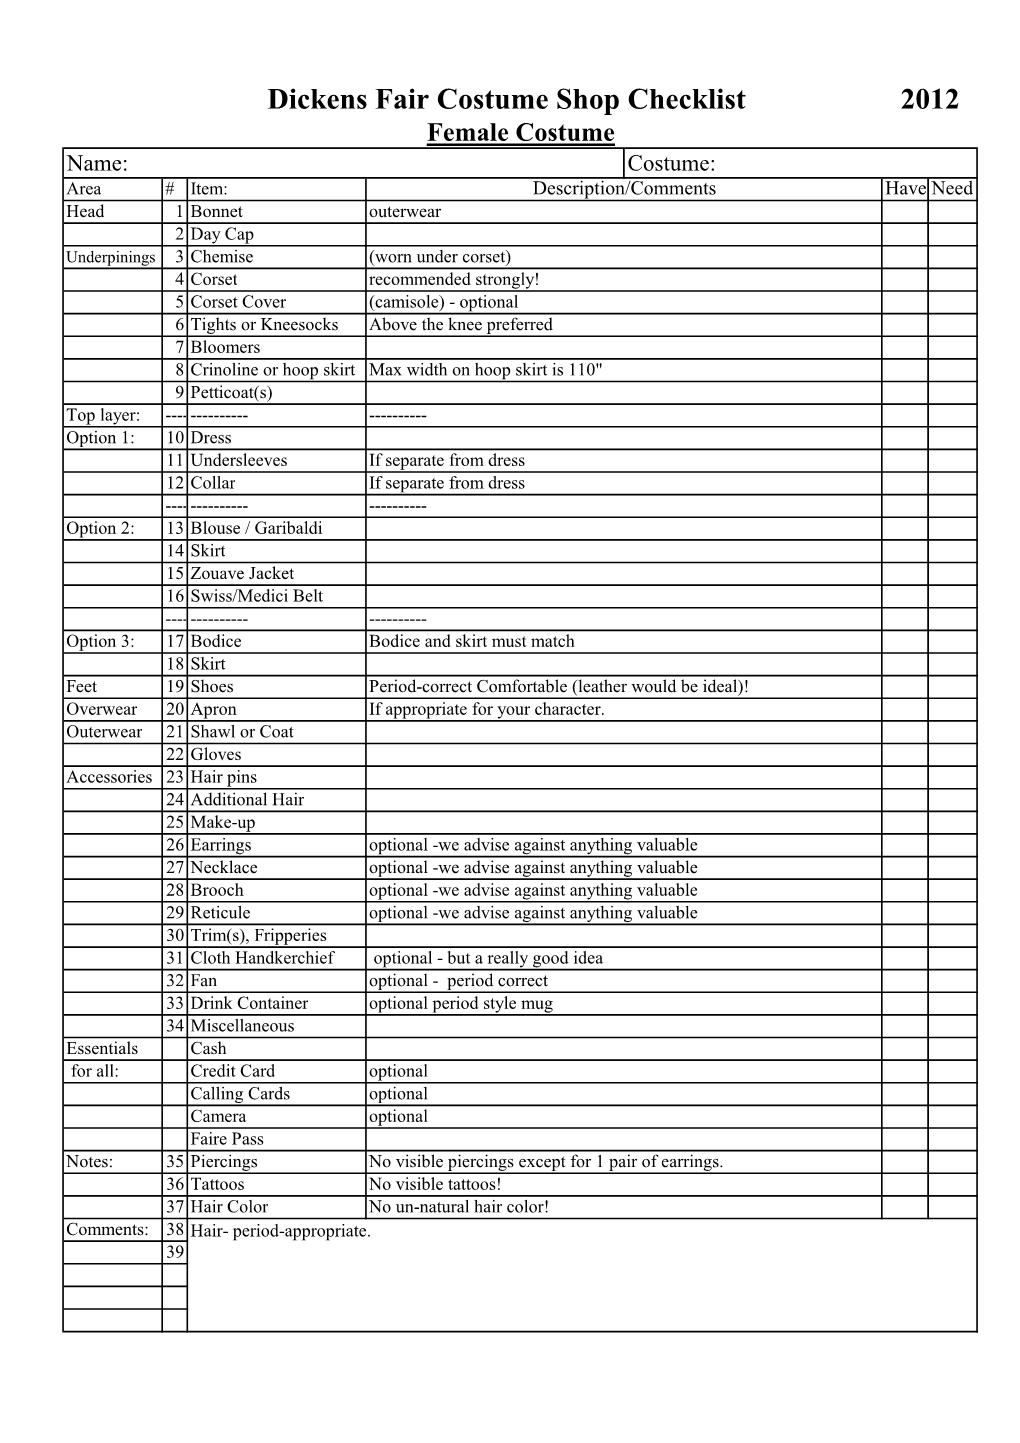 Revised Costume Approval Checklist 2012